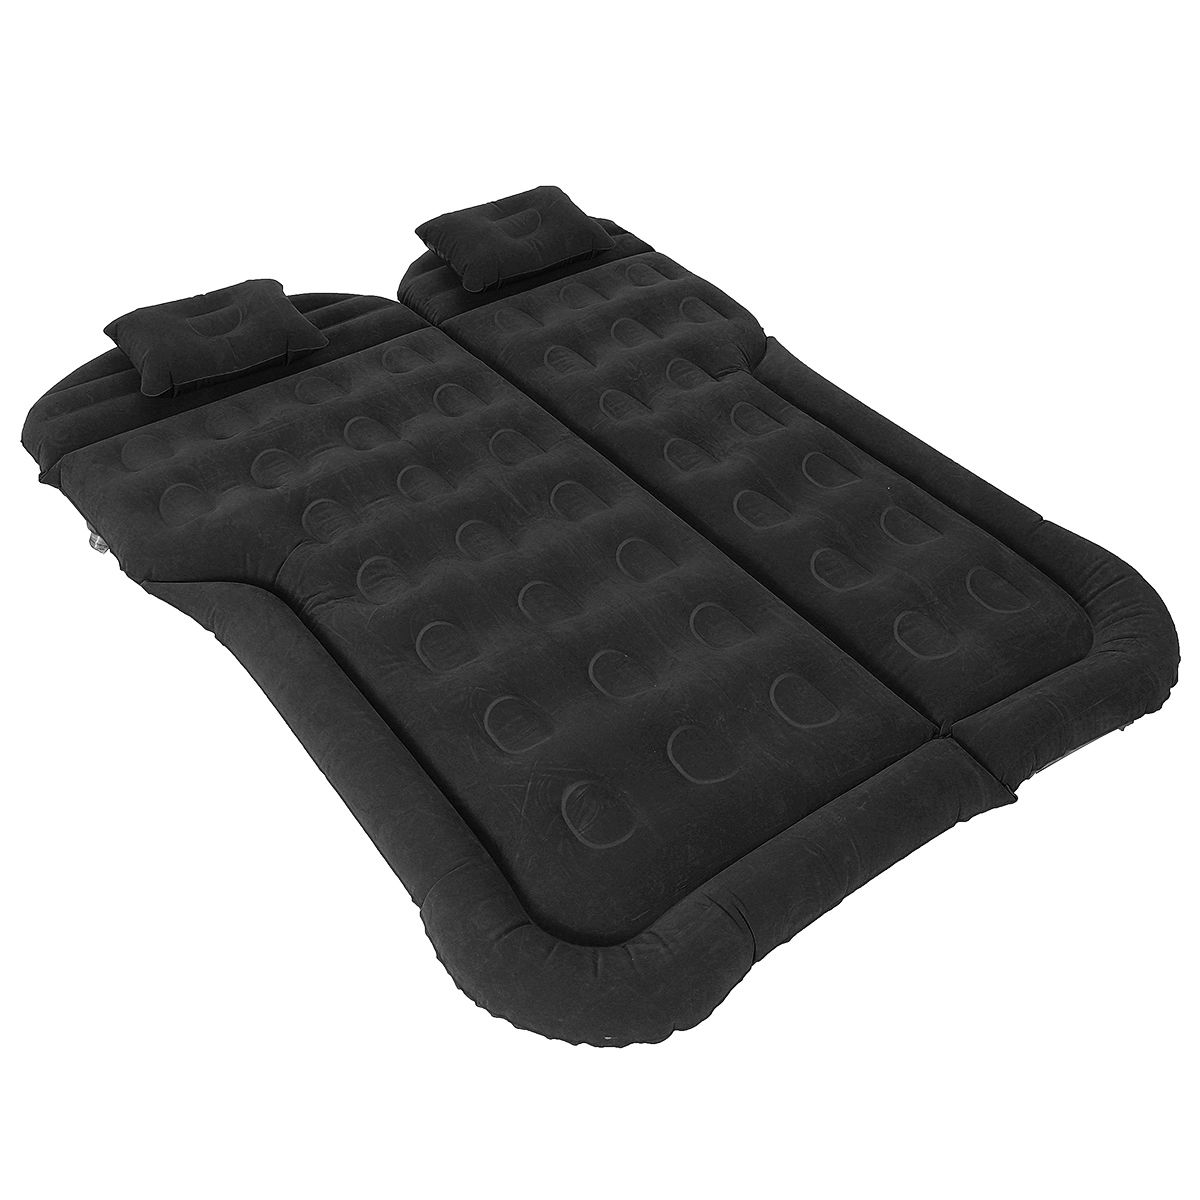 180x130cm-Multifunctional-Inflatable-Car-Air-Mattress-Durable-Back-Seat-Cover-Travel-Bed-Moisture-pr-1888970-14